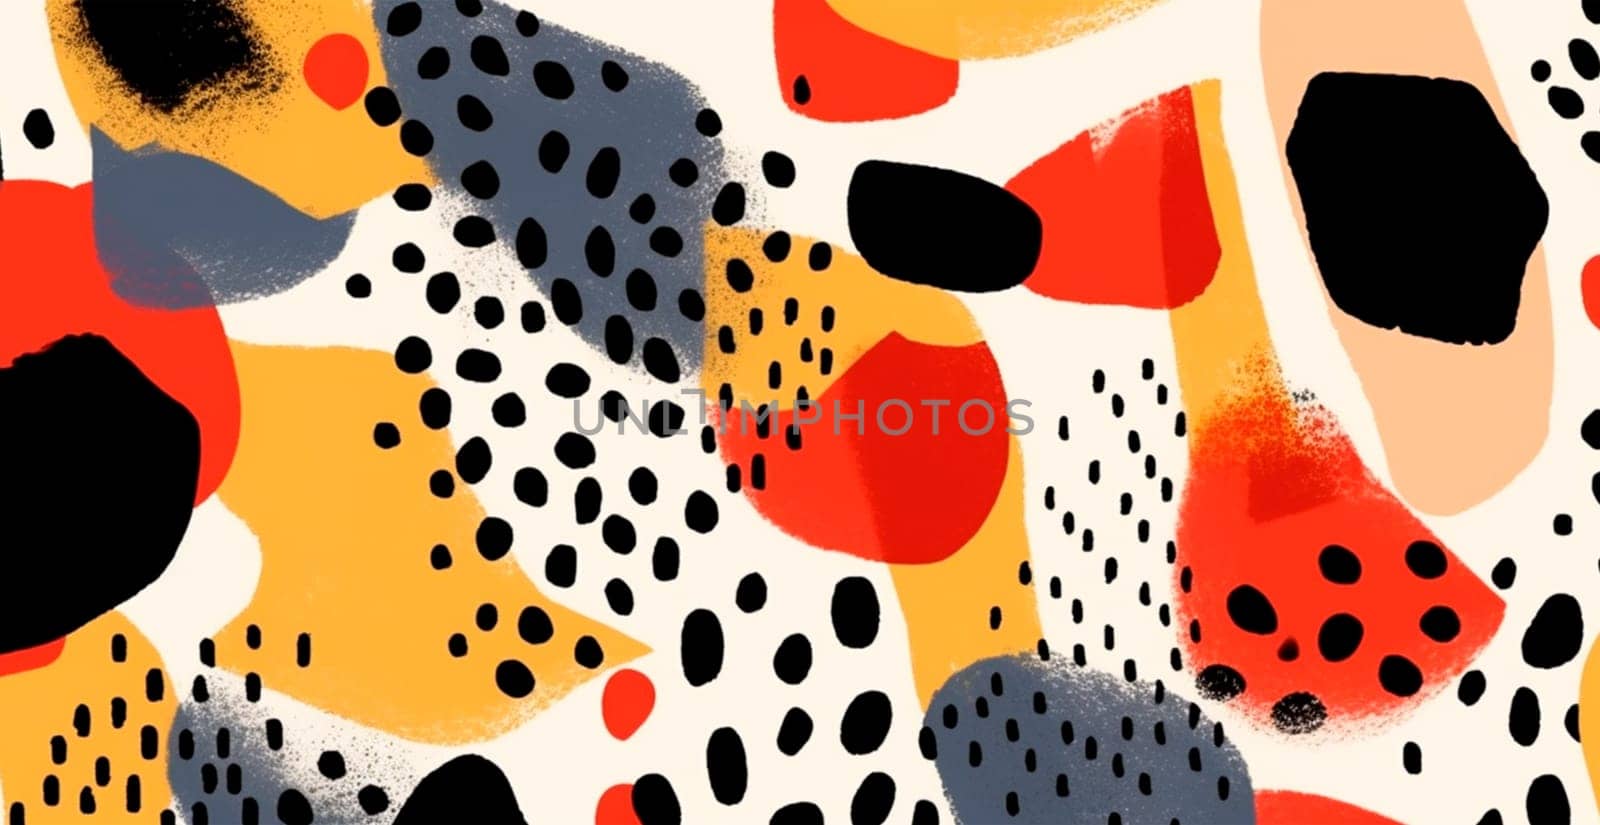 Abstract geometric shapes multicolored background - image